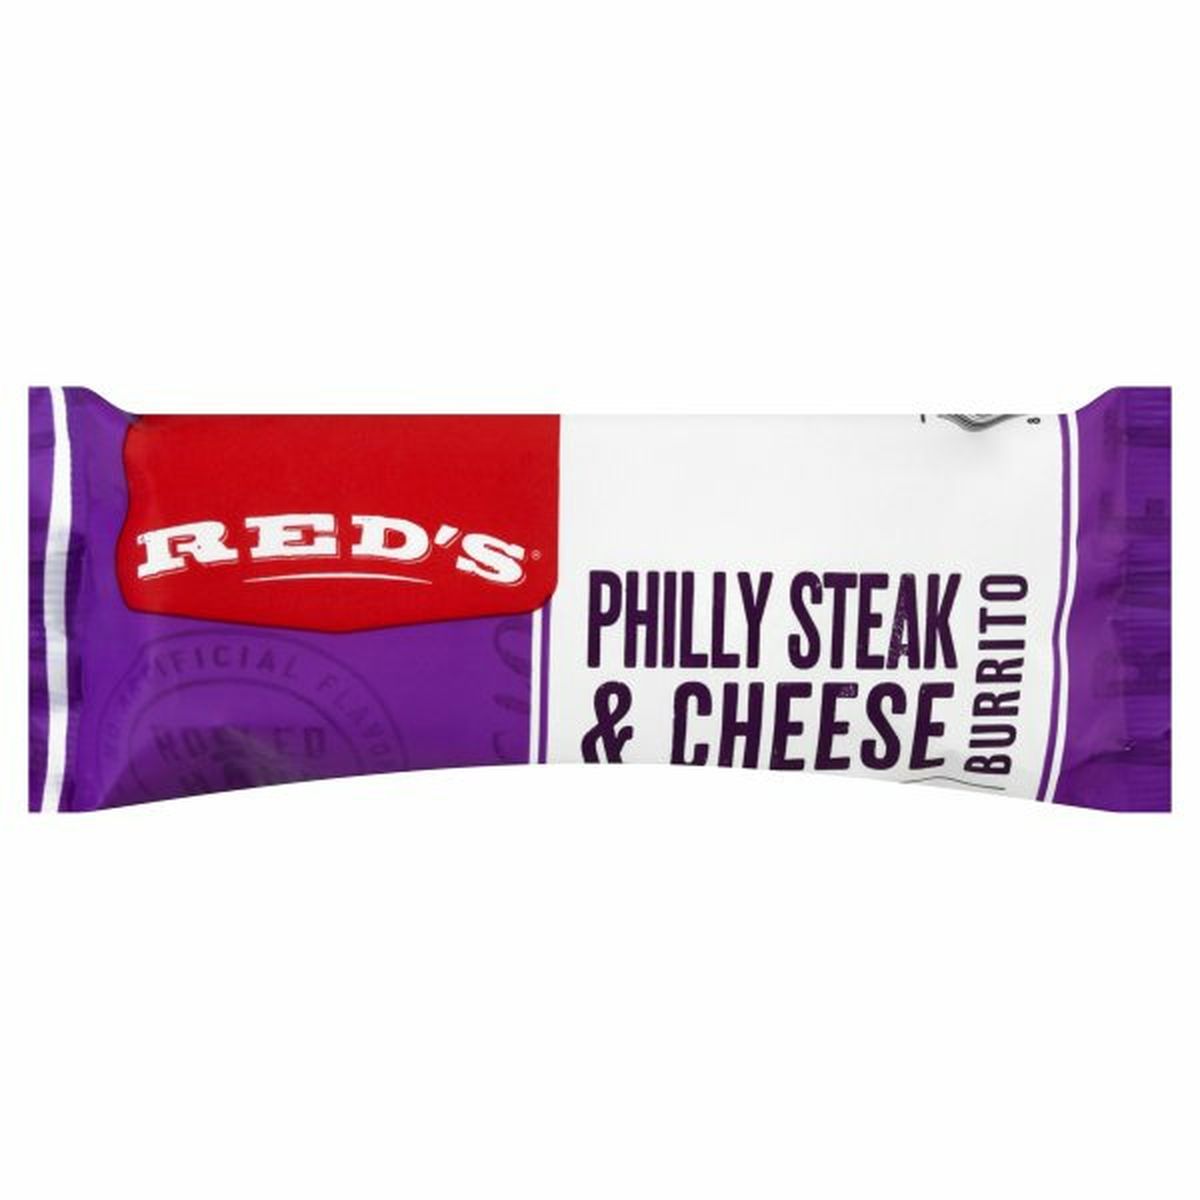 Calories in Reds Burrito, Philly Steak & Cheese